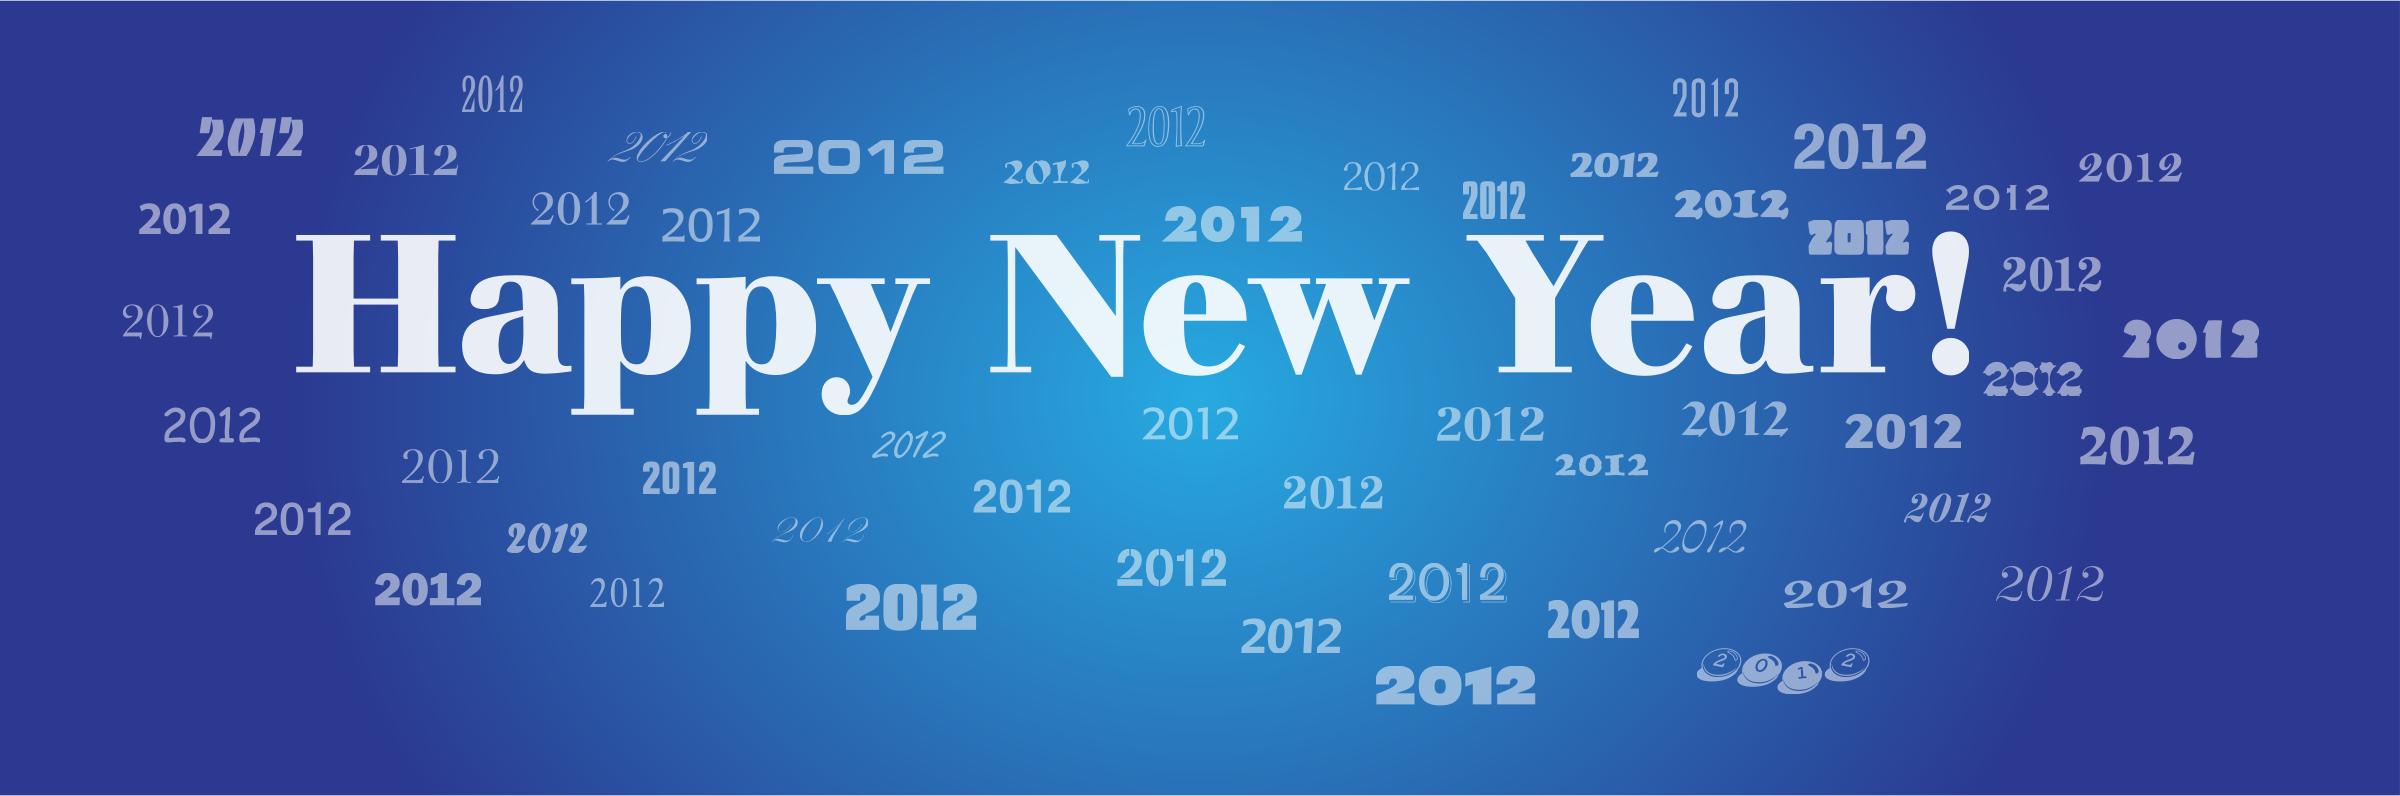 Happy New Year 2012 png